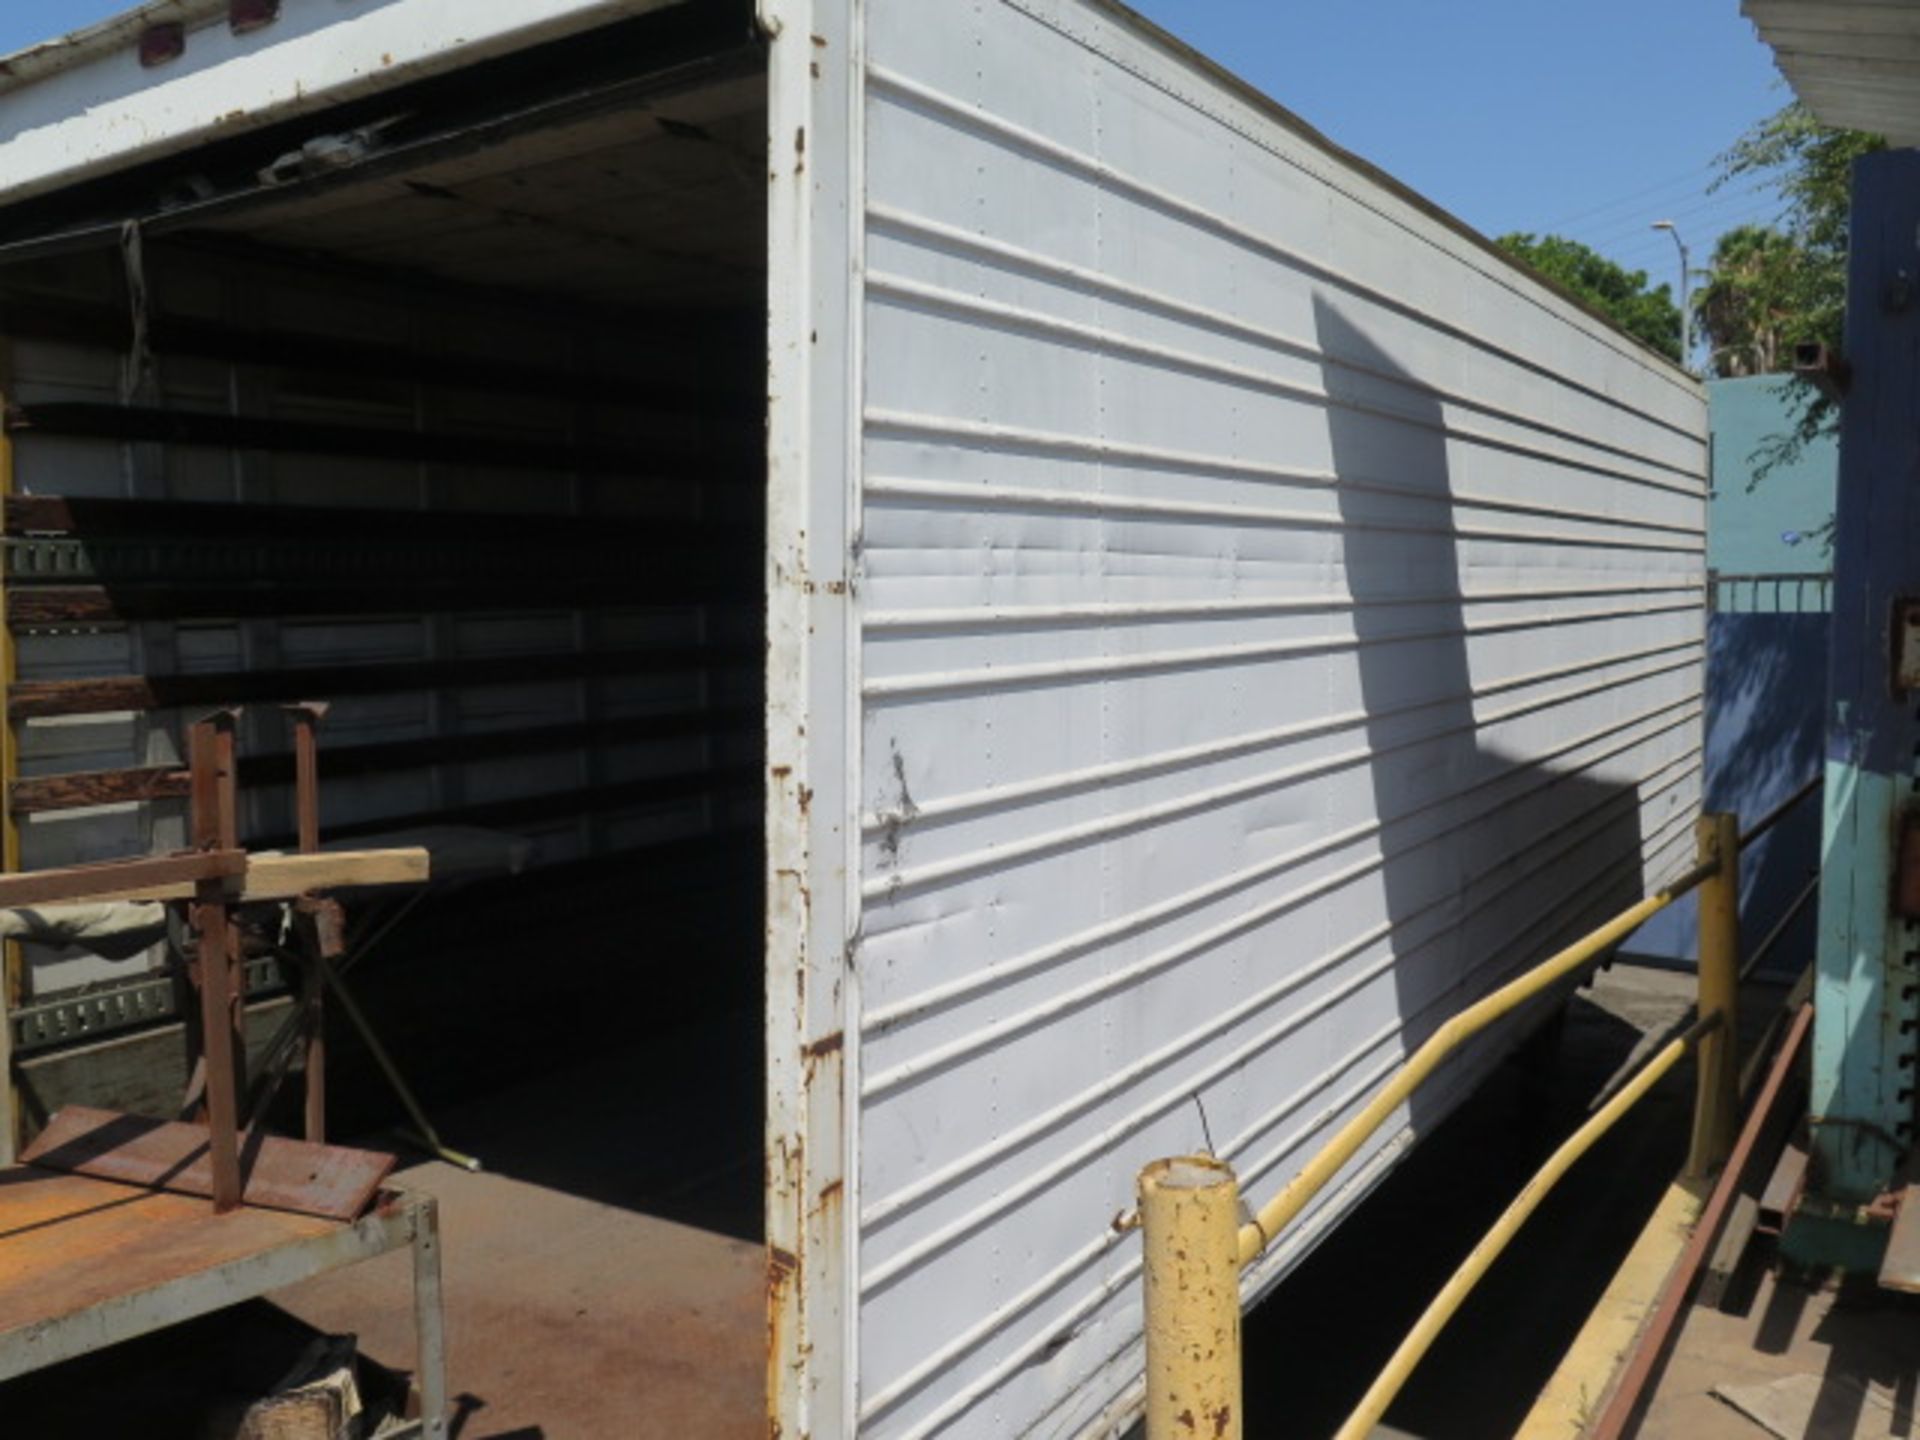 20' Trailer (SOLD AS STORAGE CONTAINER) (SOLD AS-IS - NO WARRANTY)